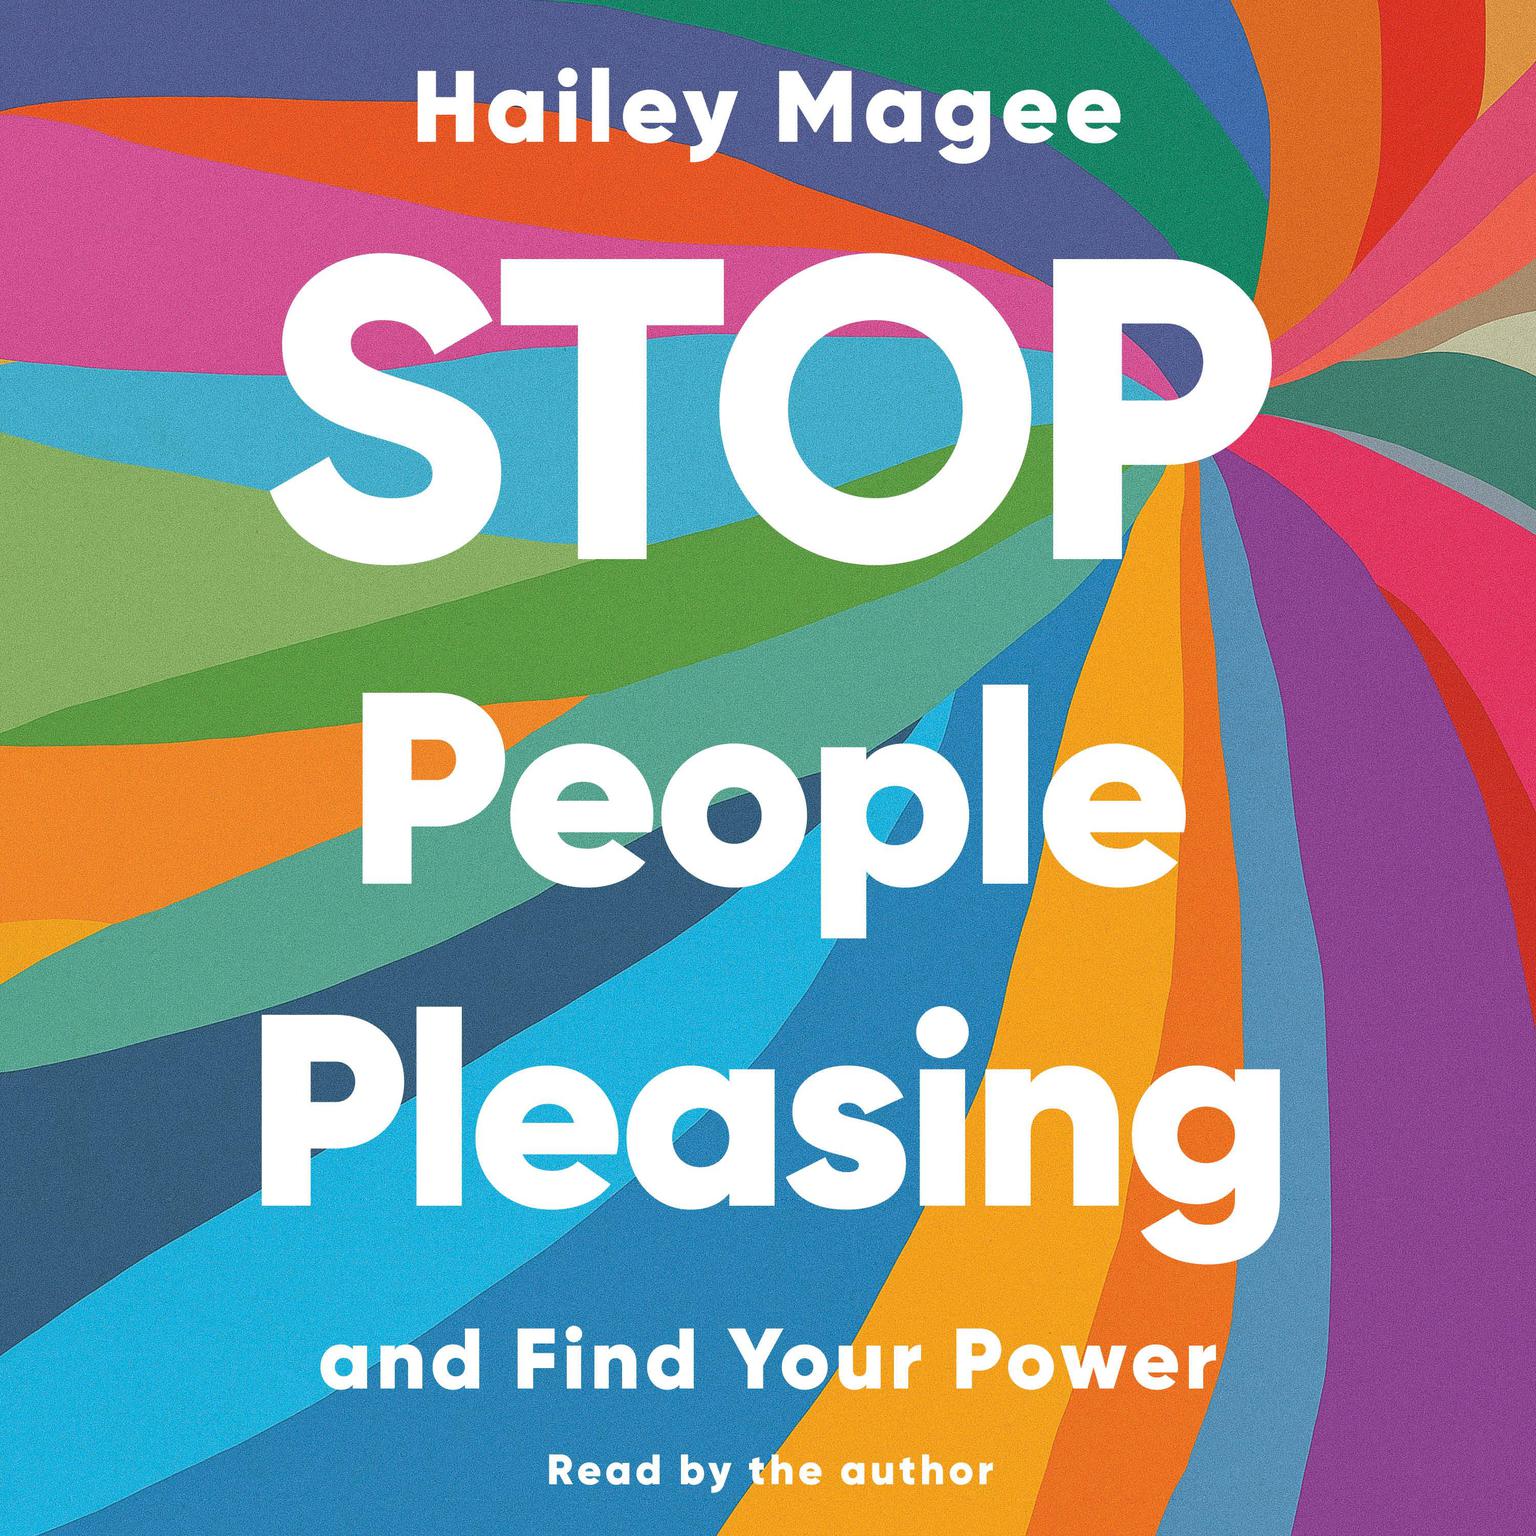 Stop People Pleasing: And Find Your Power Audiobook, by Hailey Magee